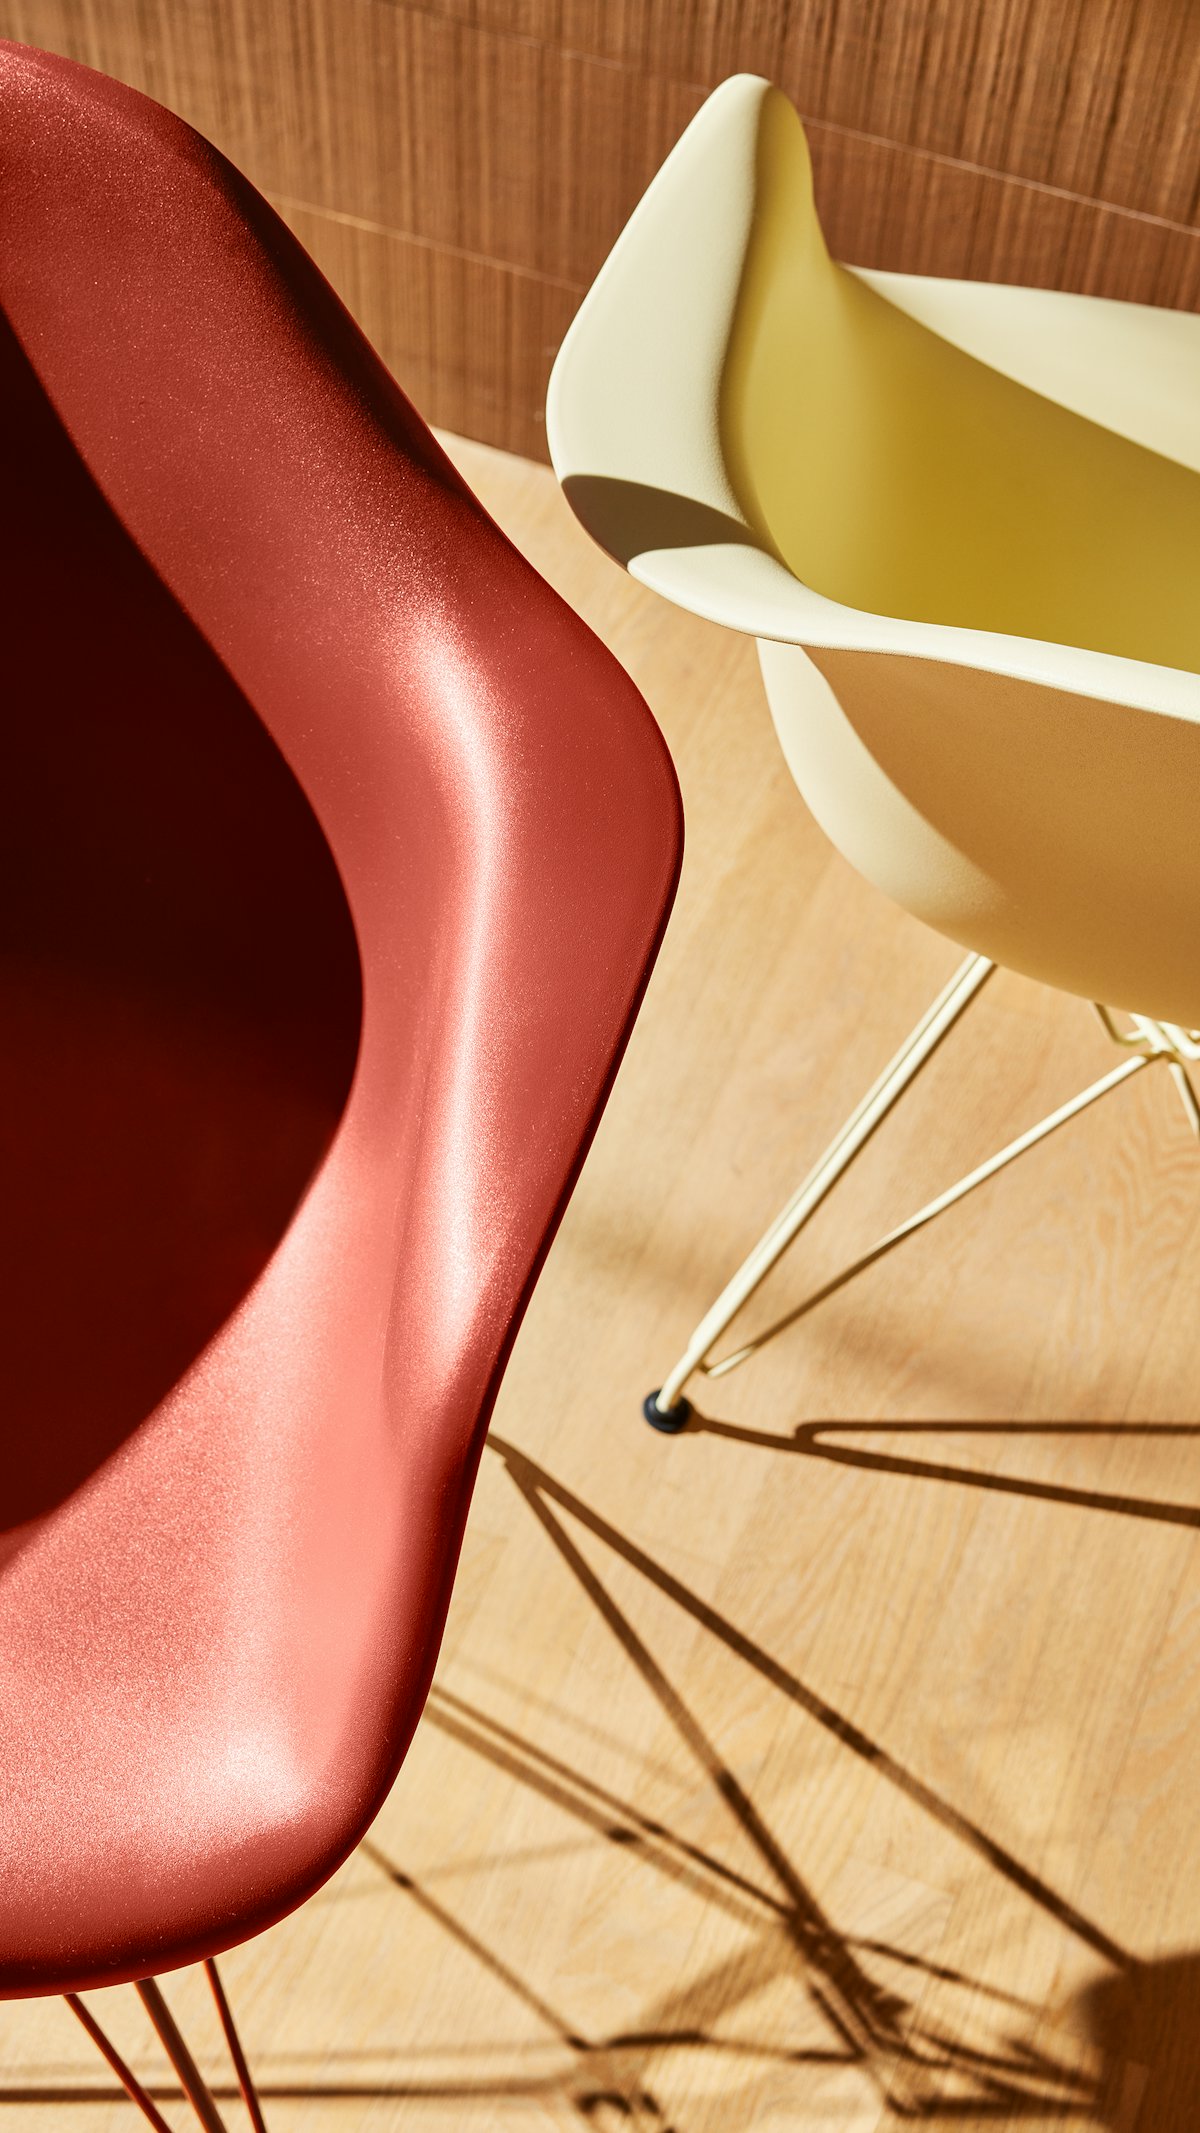 Herman Miller x  HAY, Eames Molded Plastic Armchair details of iron red and yellow